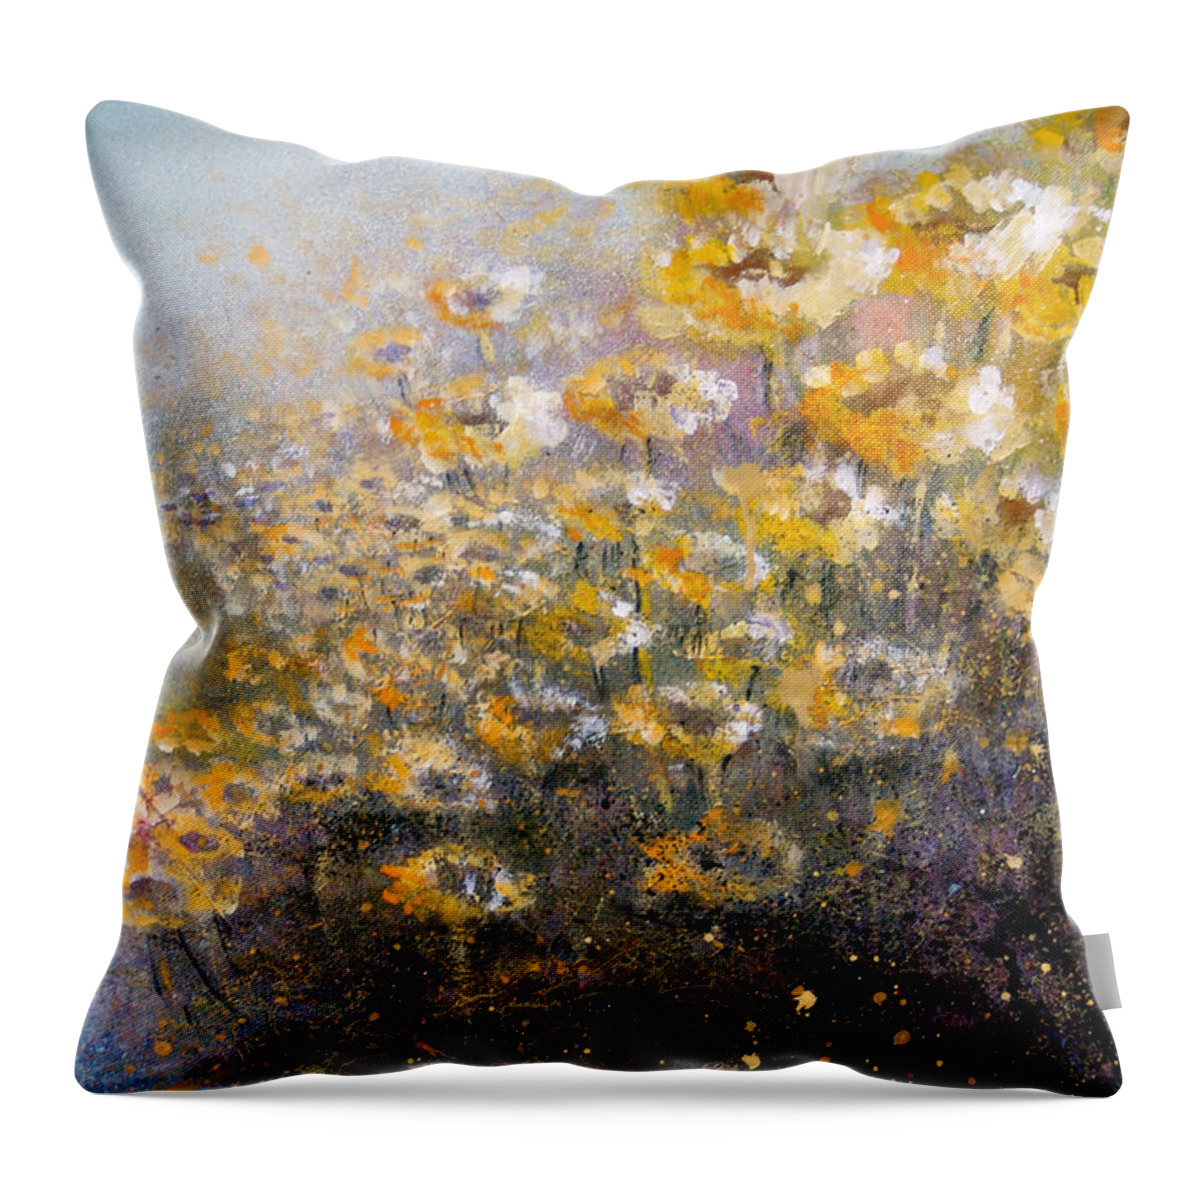 Flowers Throw Pillow featuring the painting Sunflowers by Andrew King